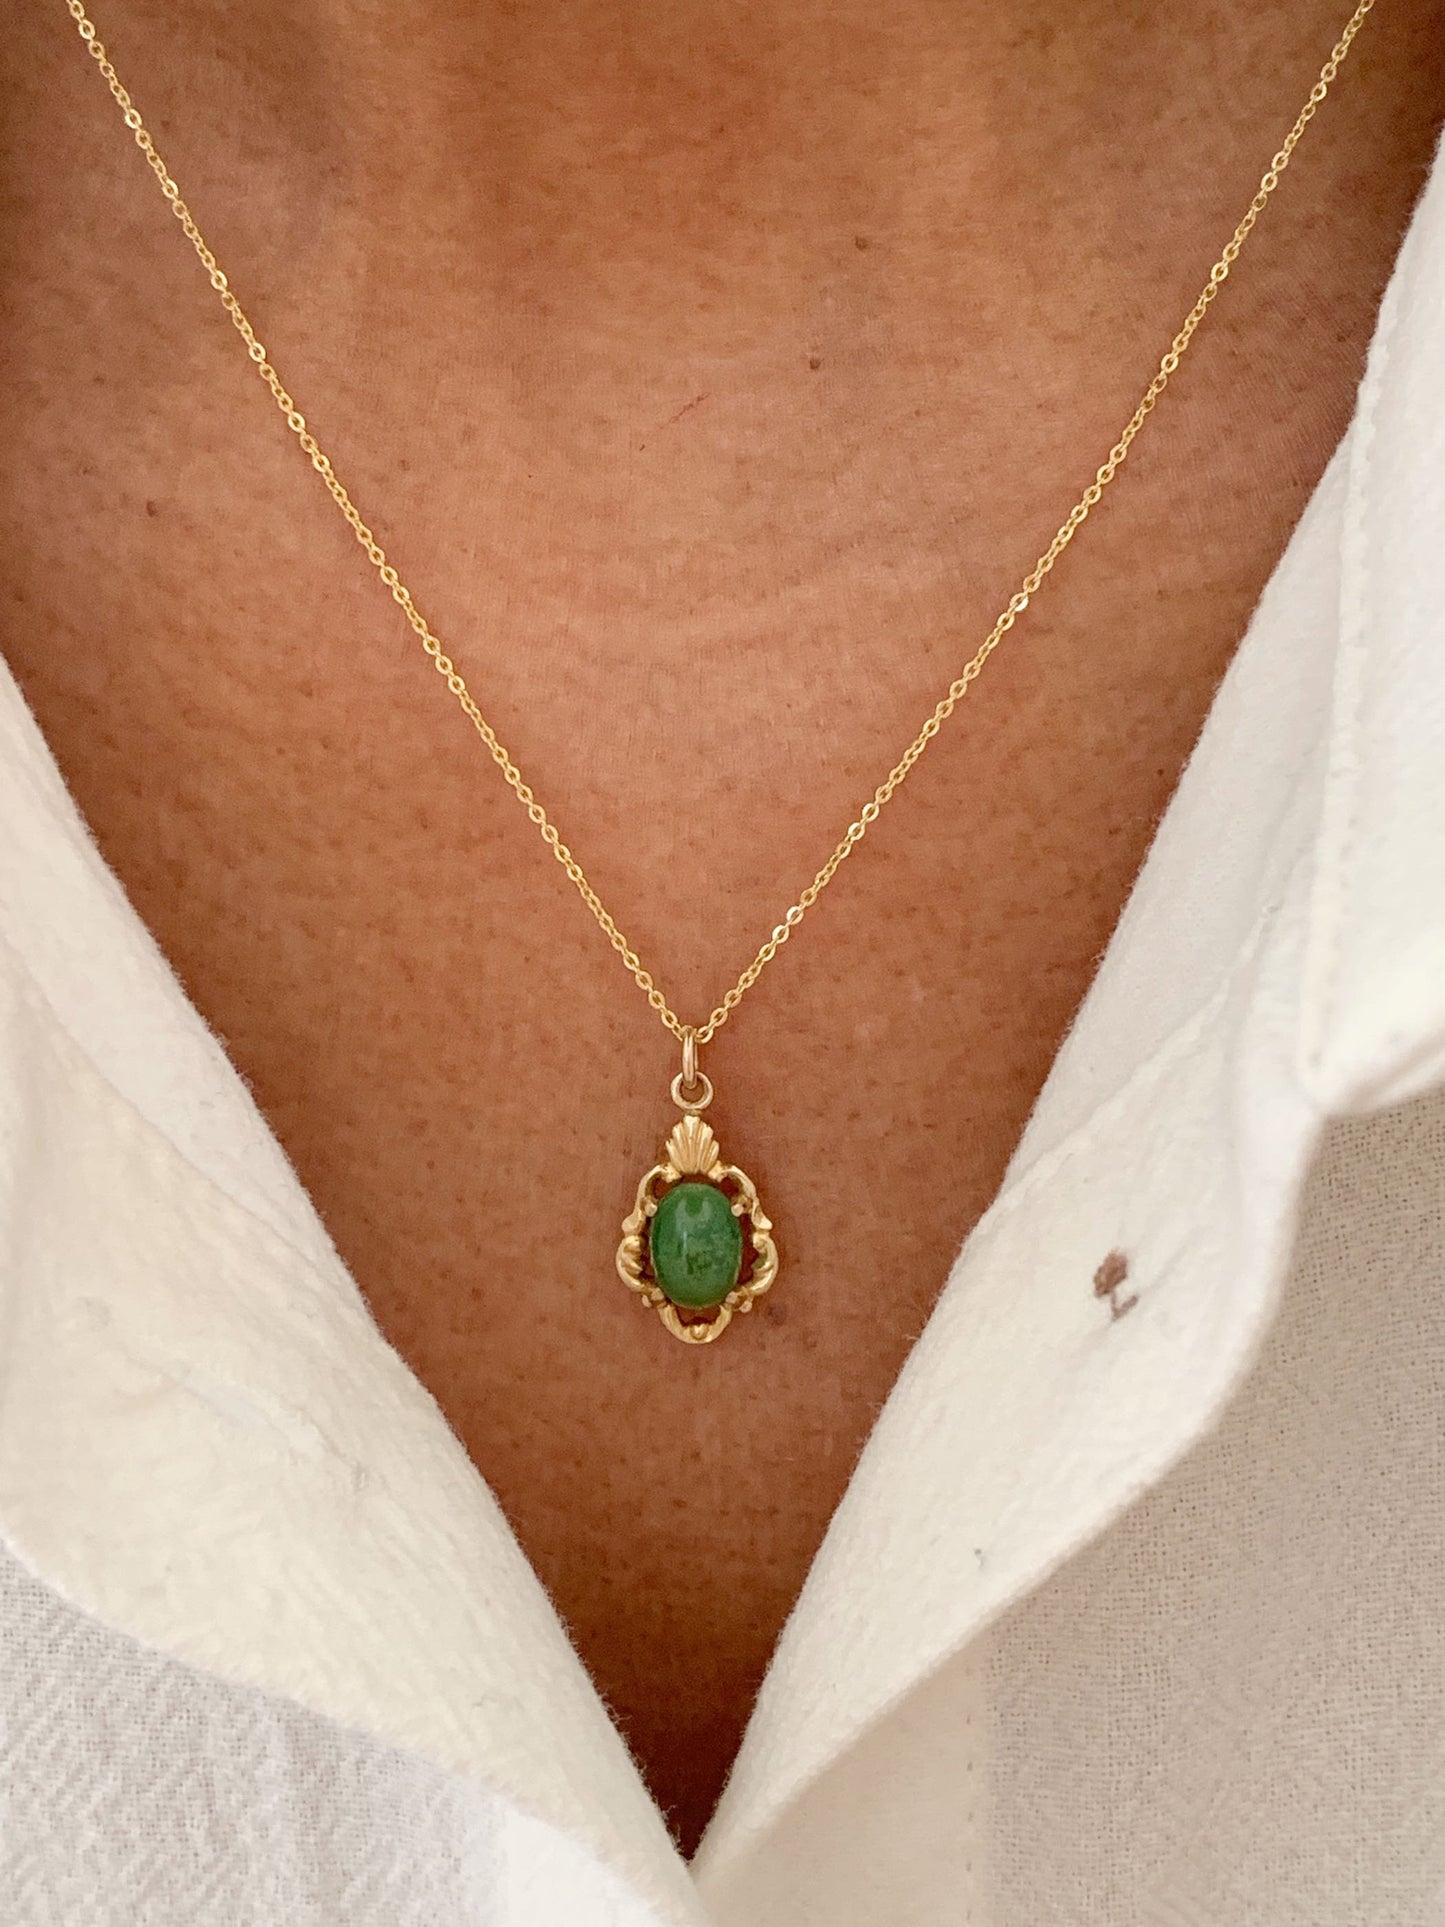 Vintage 9ct Gold Green Agate Pendant Necklace